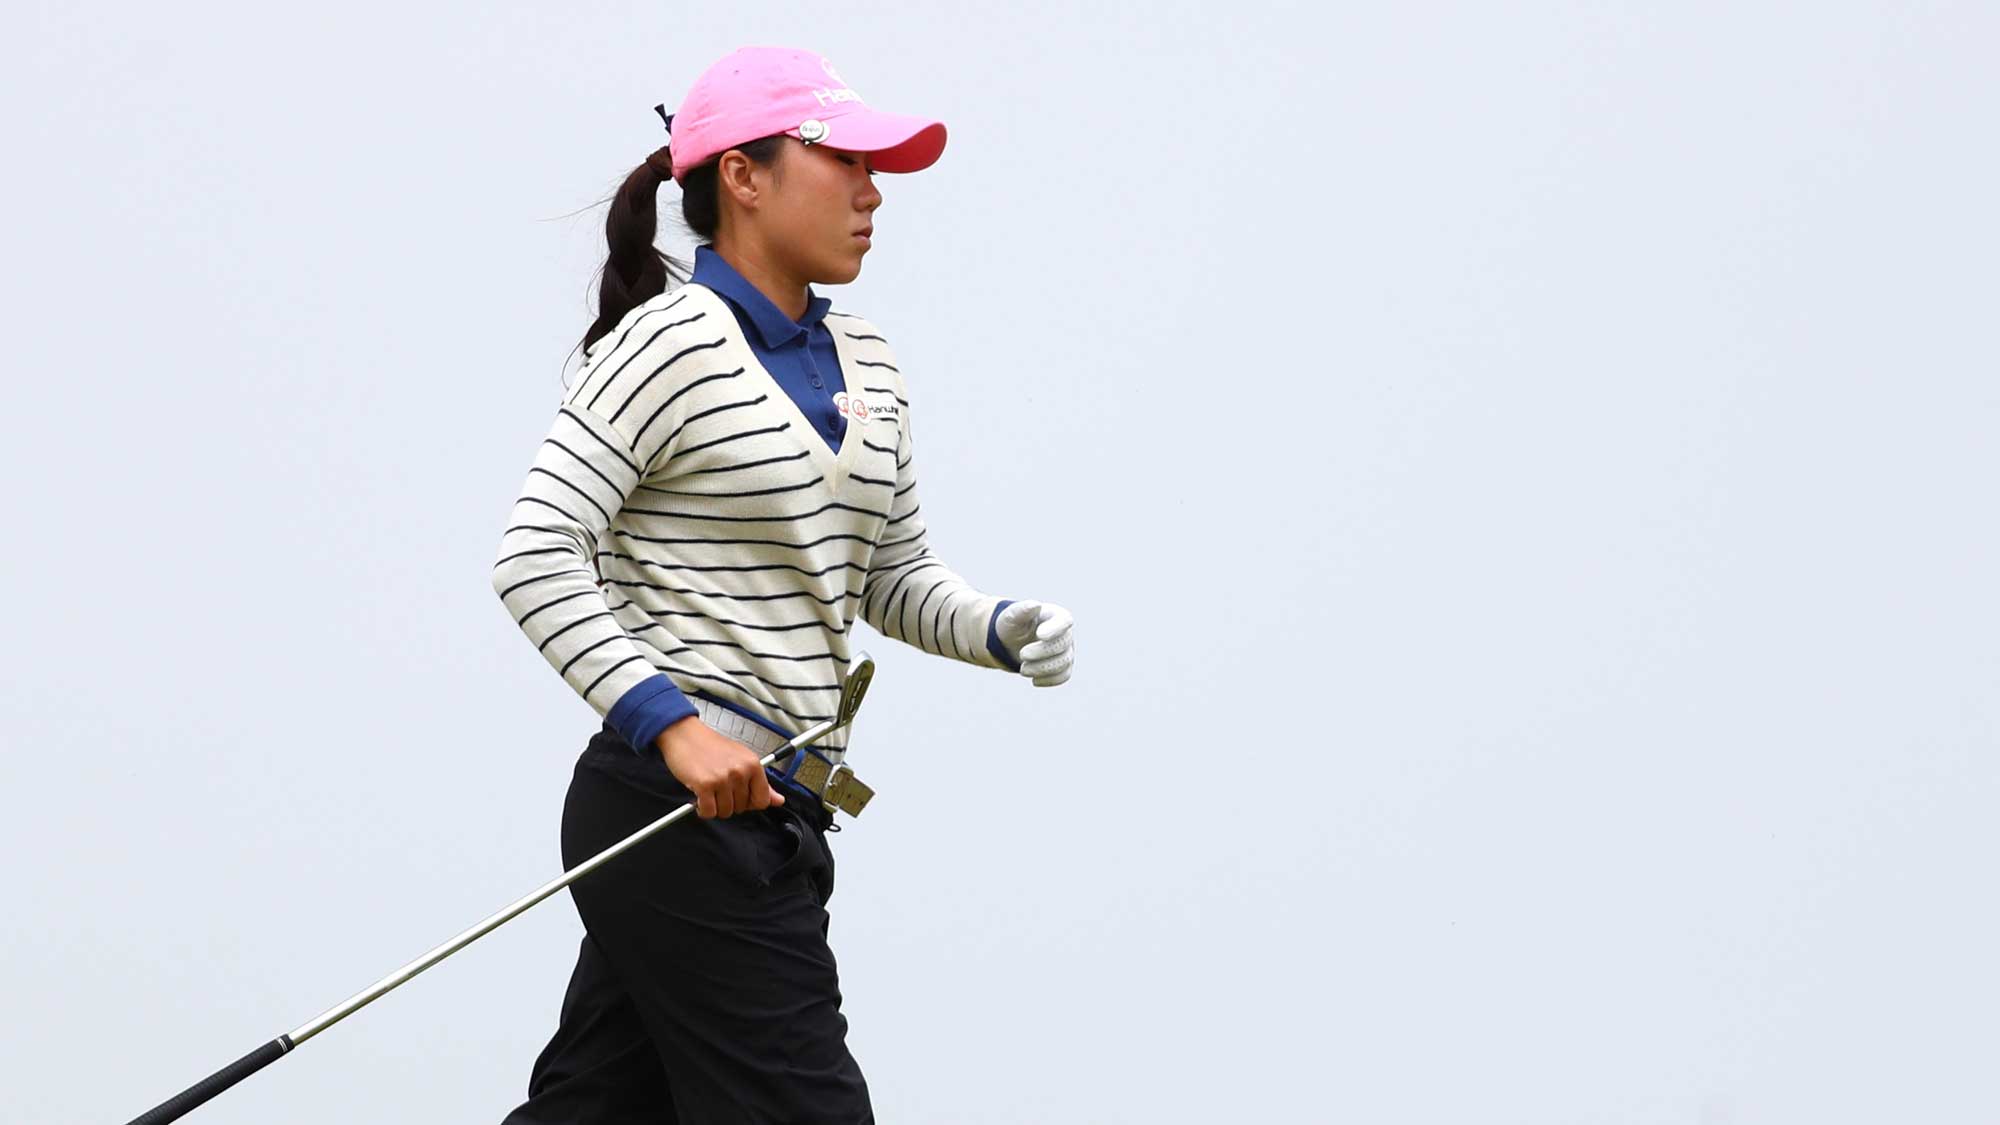 In-Kyung Kim of Korea runs up the 4th hole during the second round of the Ricoh Women's British Open at Kingsbarns Golf Links